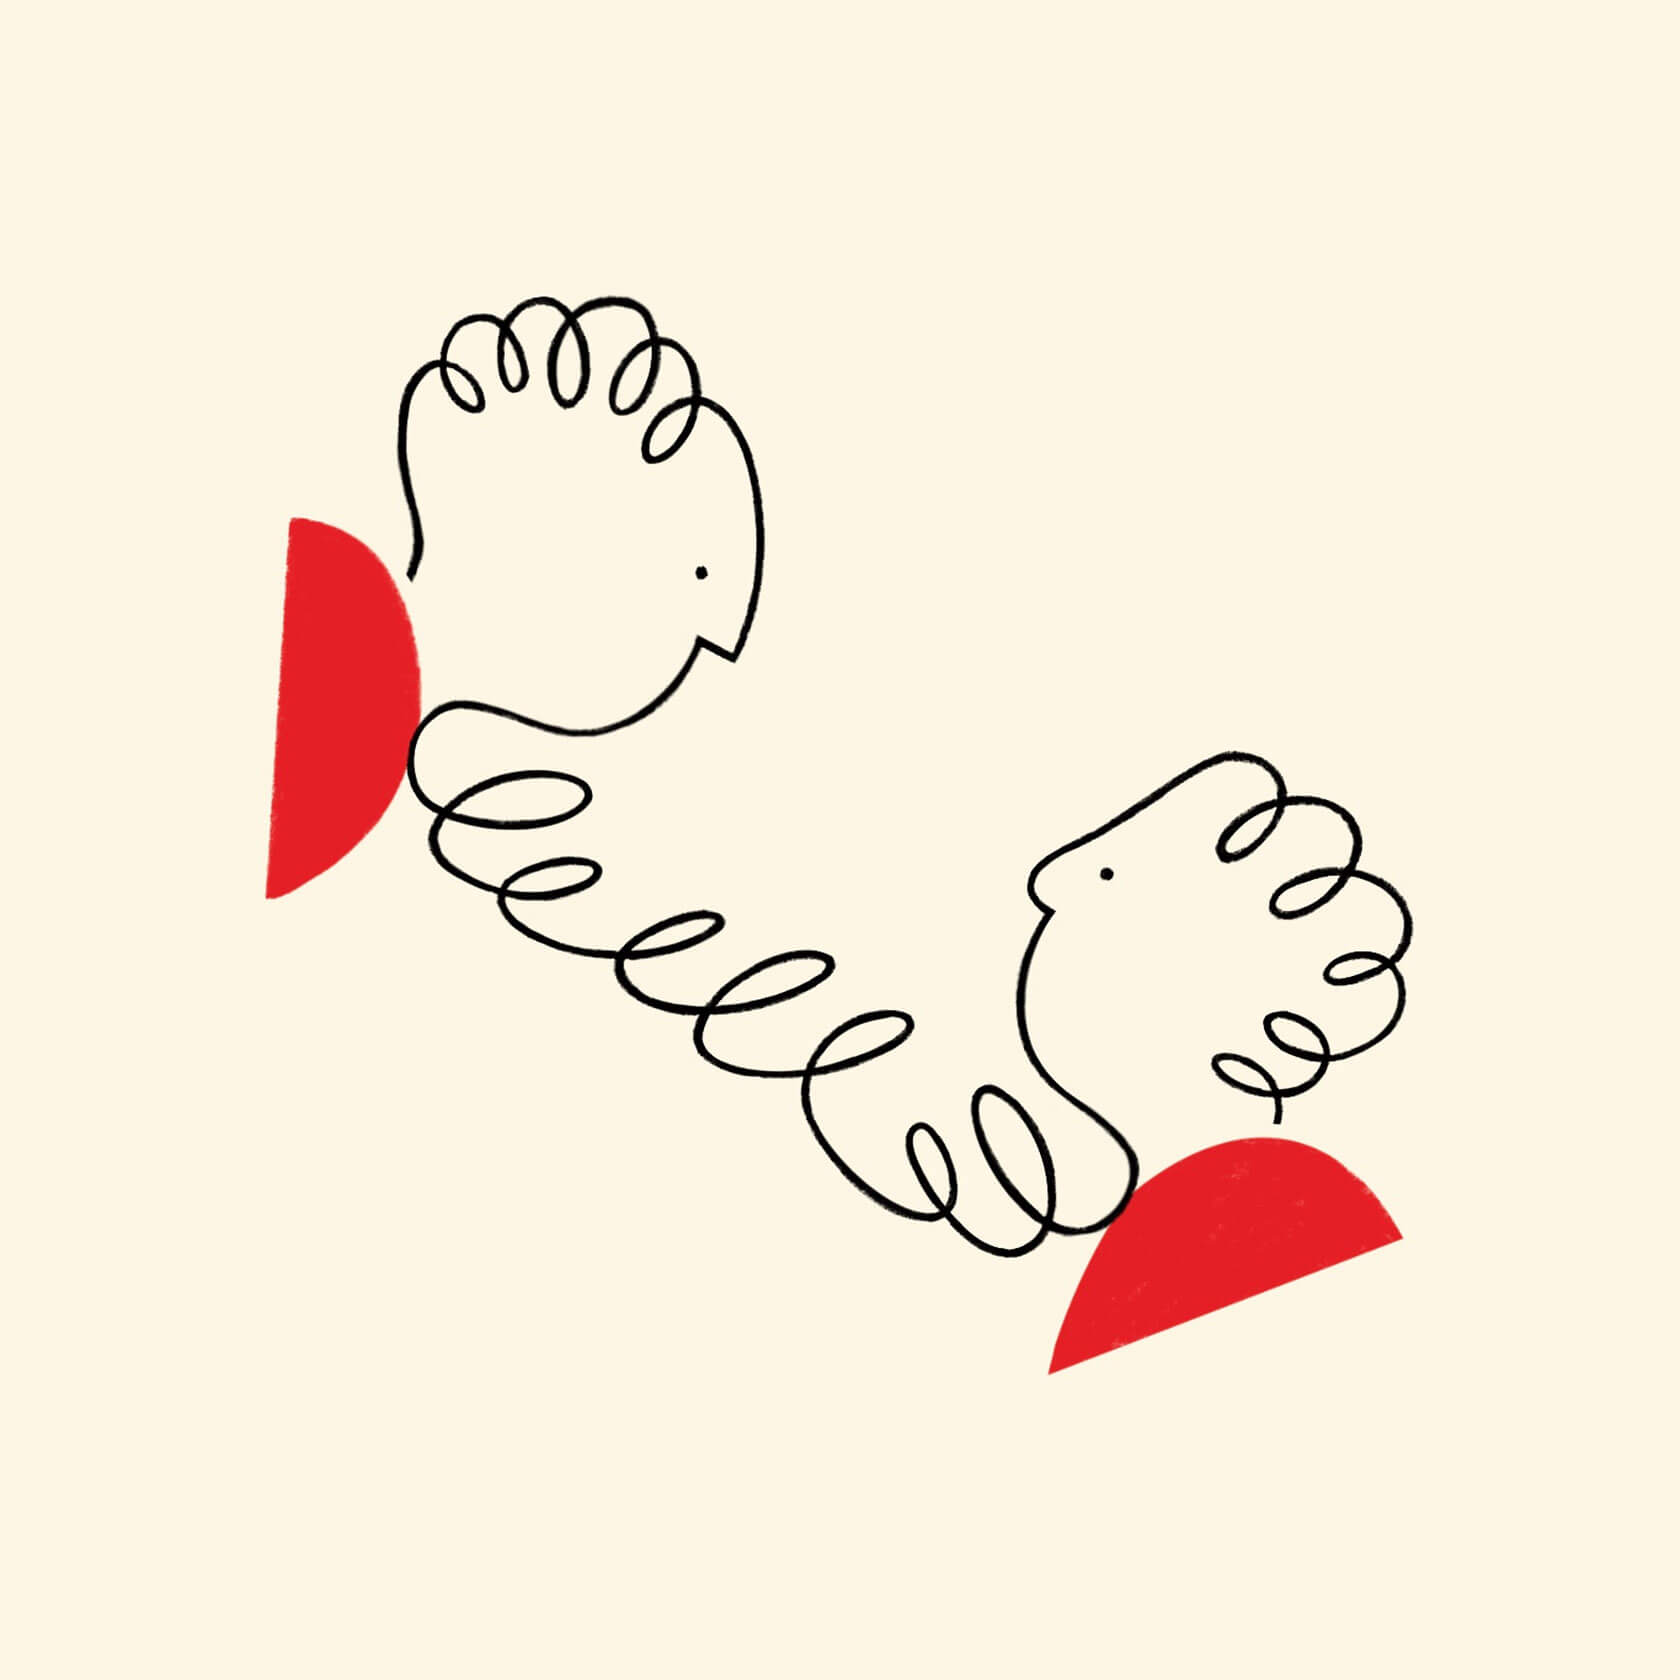 Minimal and simple illustrations by Agathe Sorlet